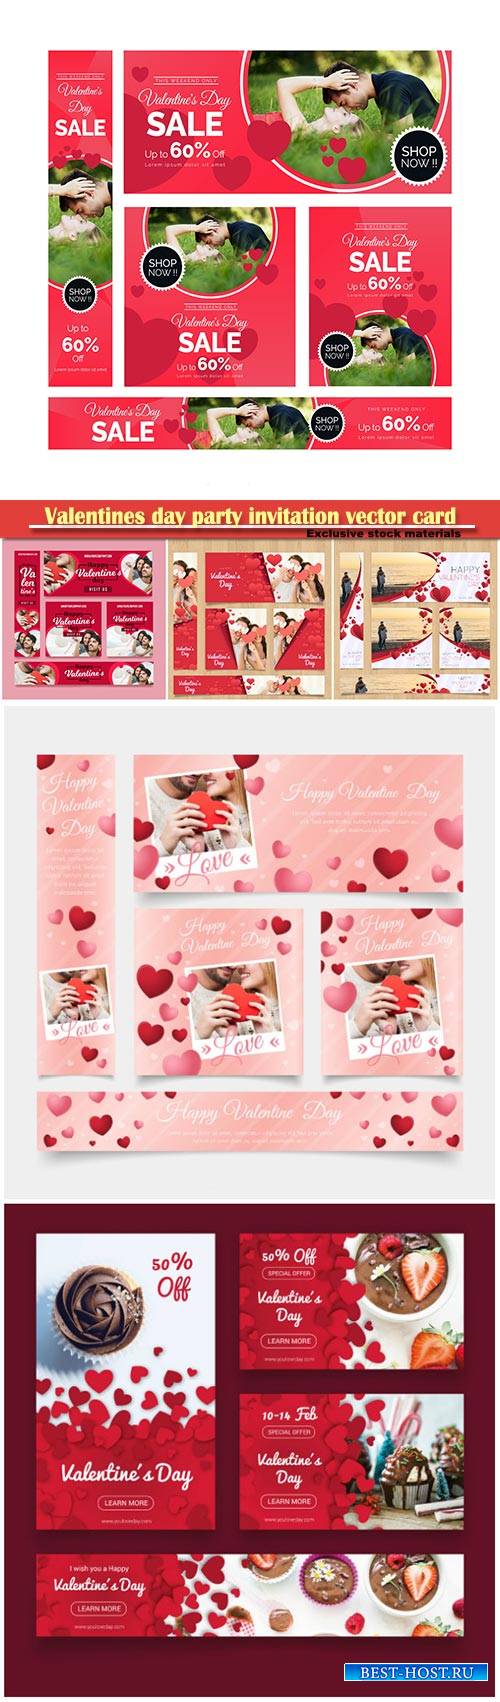 Valentines day party invitation vector card # 55